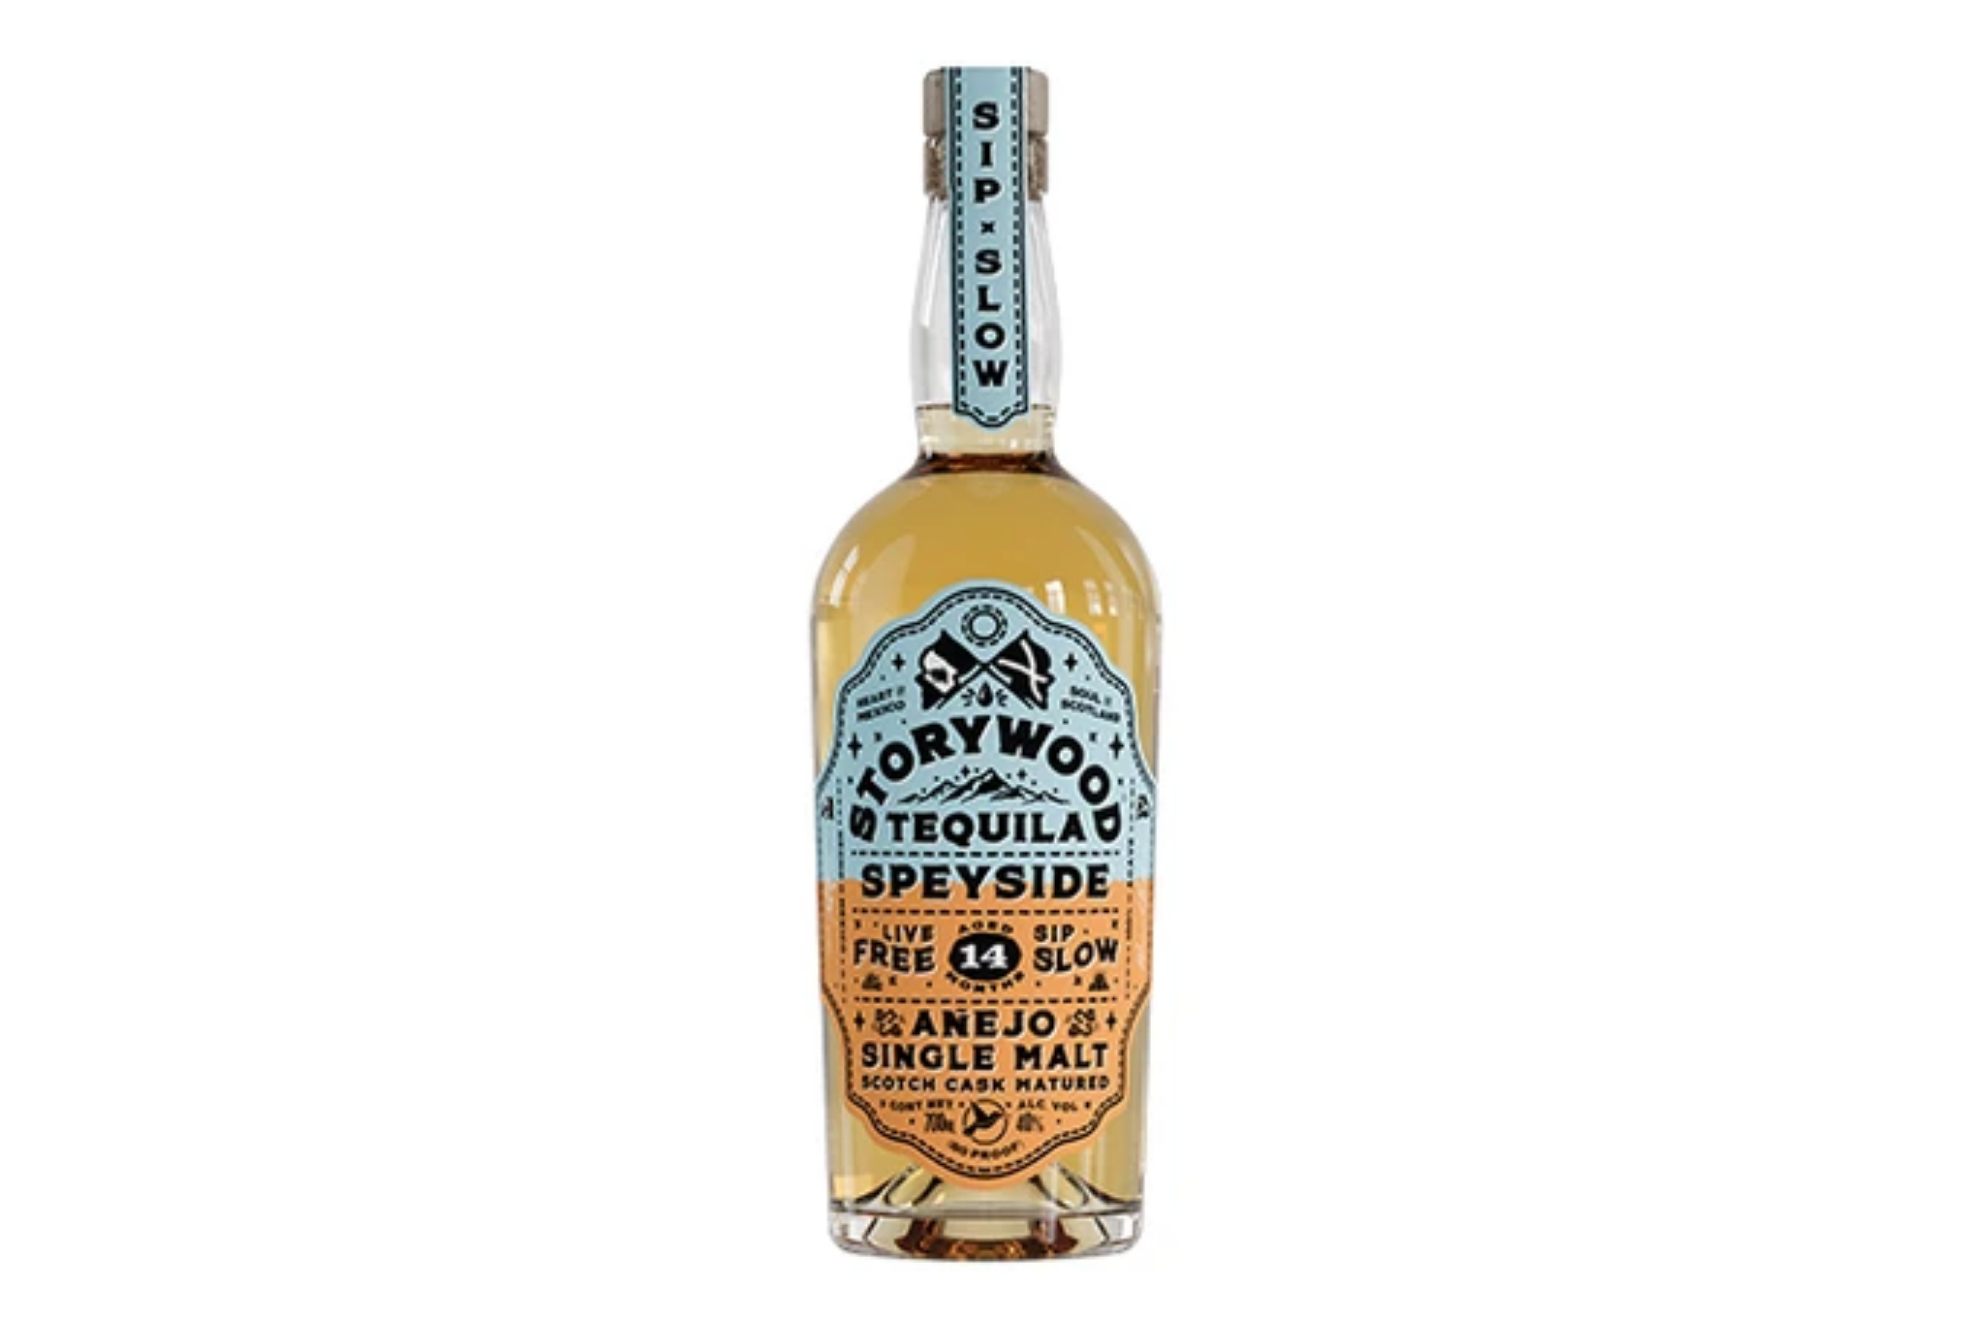 Storywood Speyside 14 Tequila 70cl